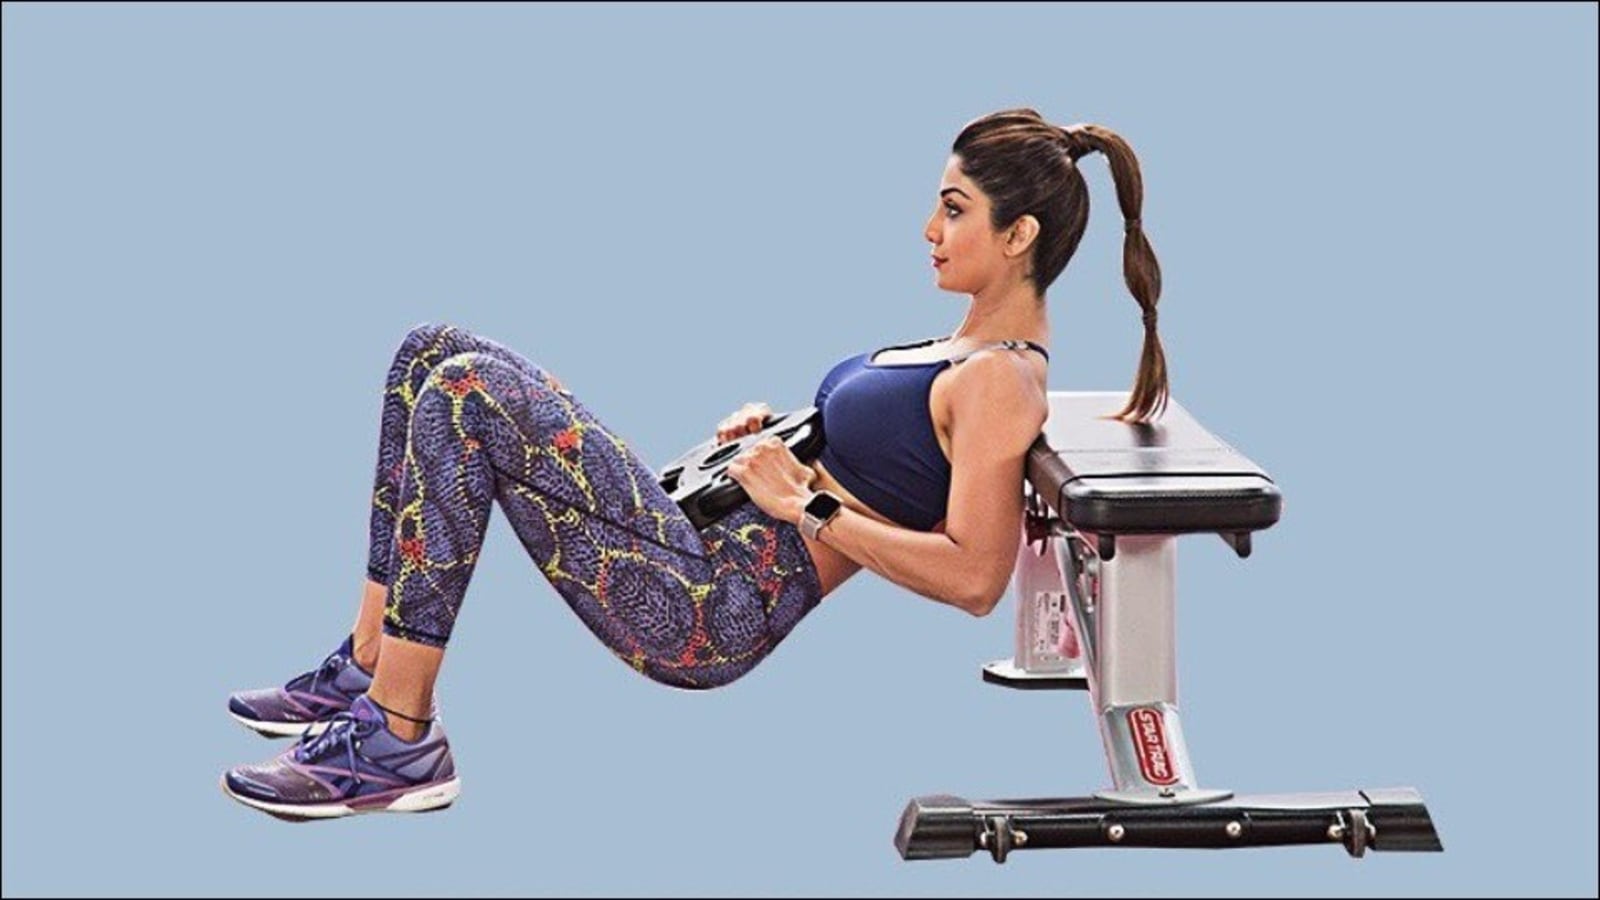 Shilpa Shetty’s pull-ups, push-ups, lunges inside a bus is perfect fitness inspo | Health